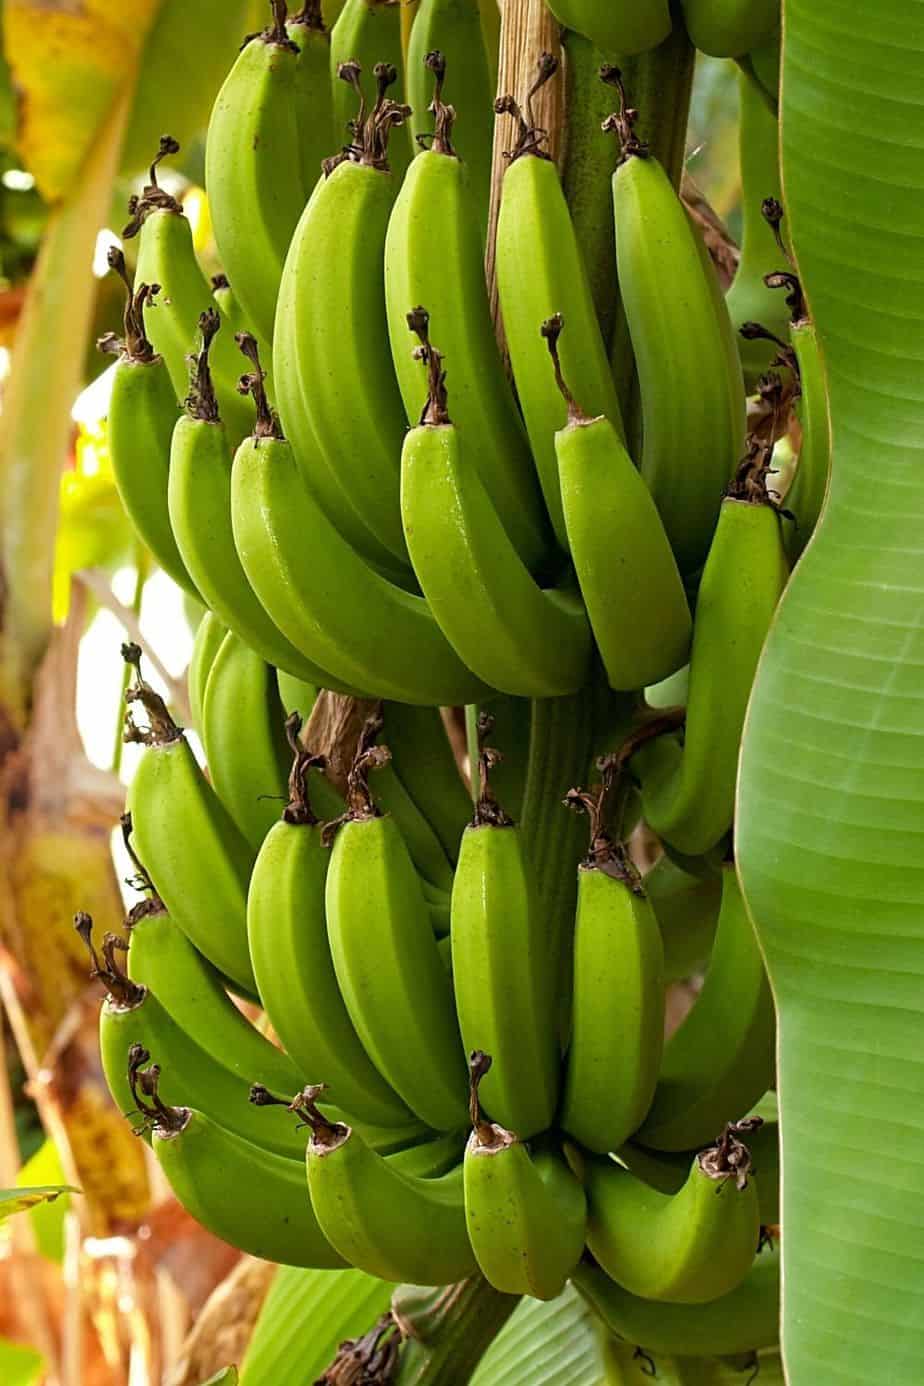 Now, if you're raring to add an edible plant to your southeast facing garden, Japanese Banana is a great choice